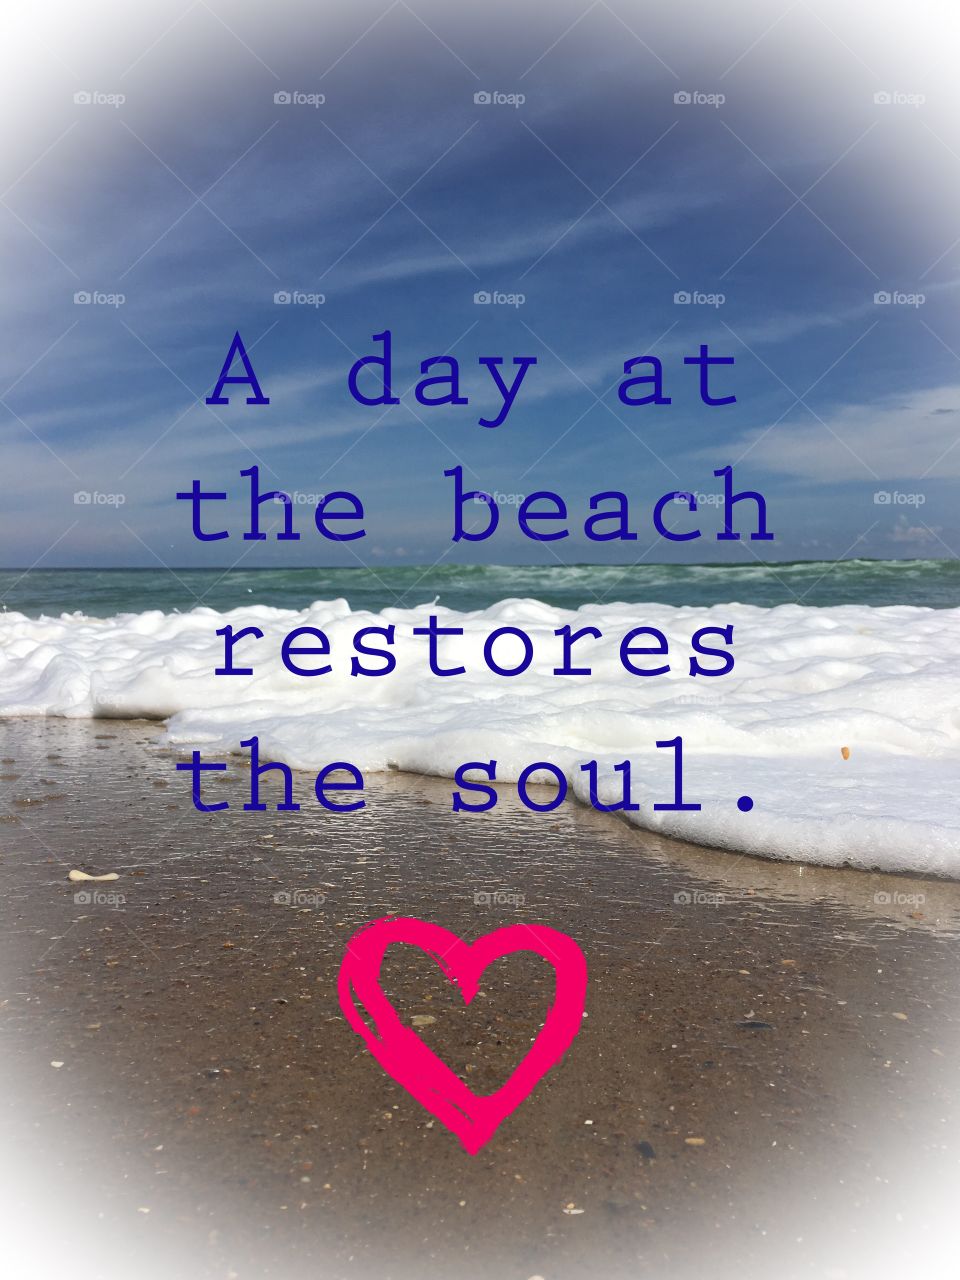 A day at the beach restores the soul. 